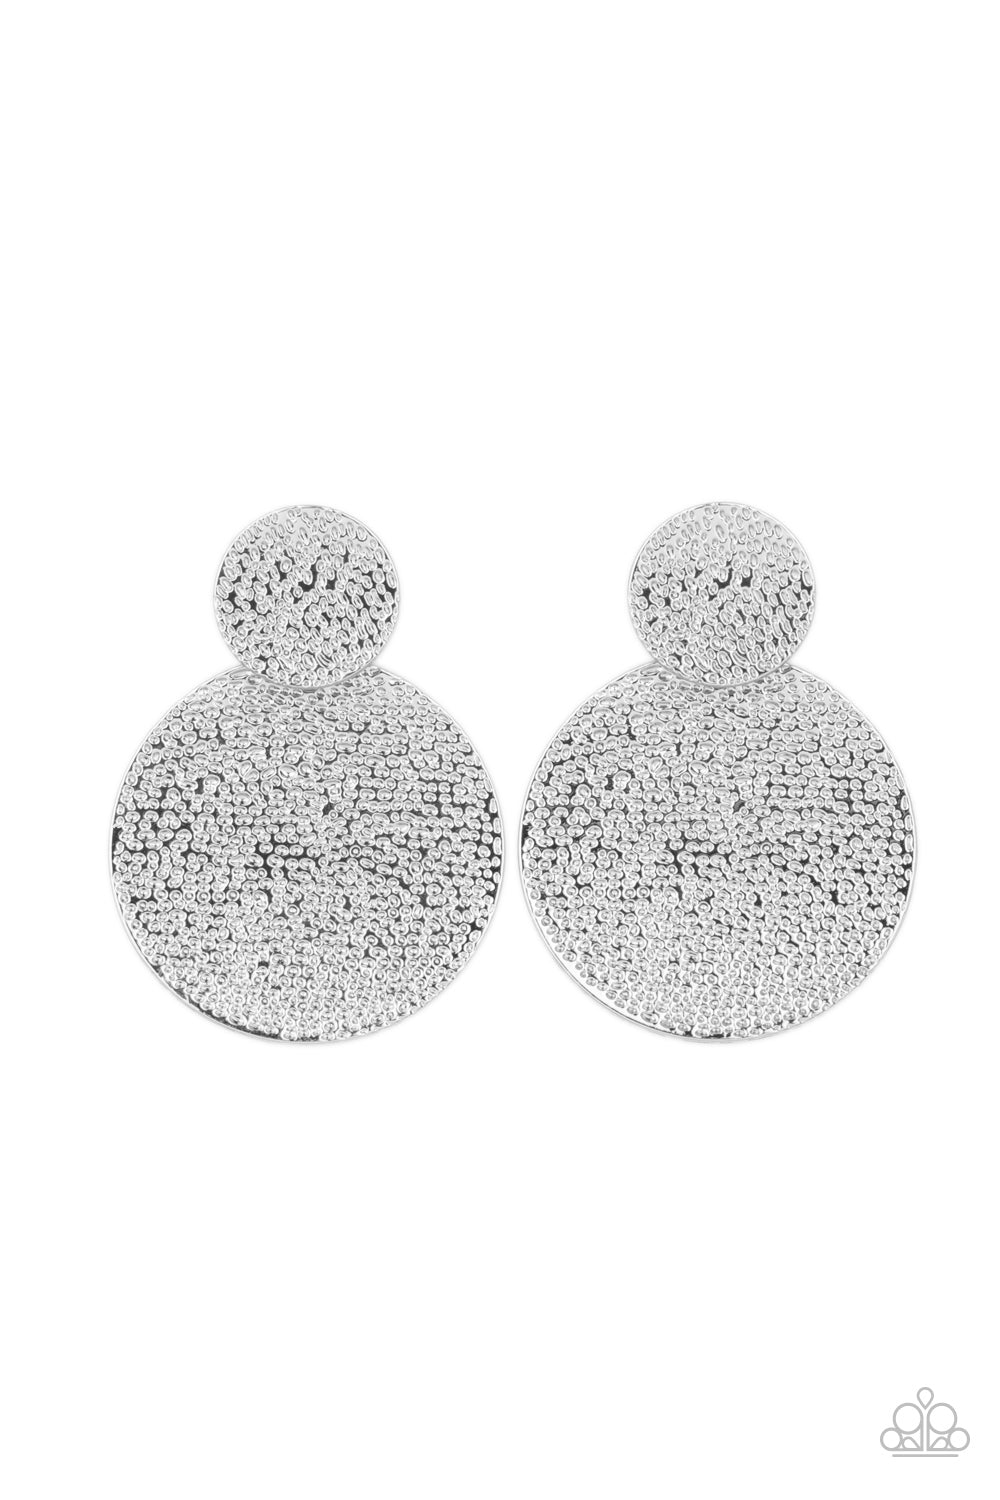 Paparazzi Accessories Refined Relic - Silver Earrings - Lady T Accessories